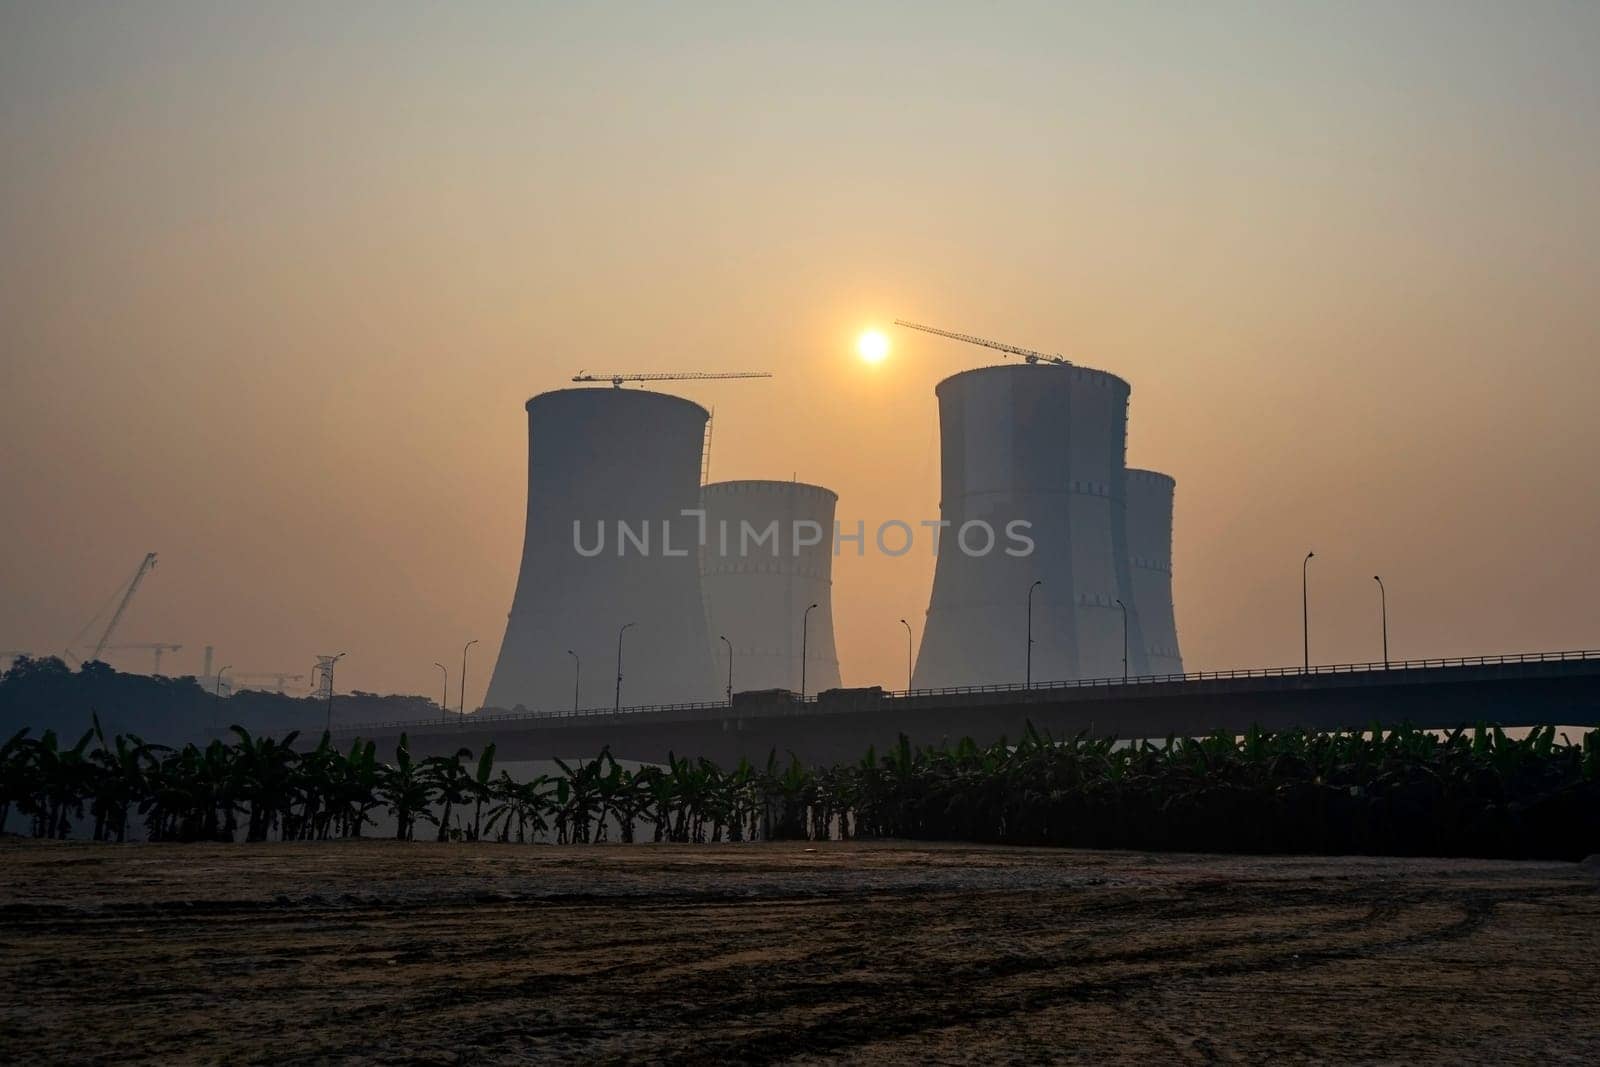 Cooling towers of the Ruppur Nuclear Power Plant, Bangladesh. by paca-waca